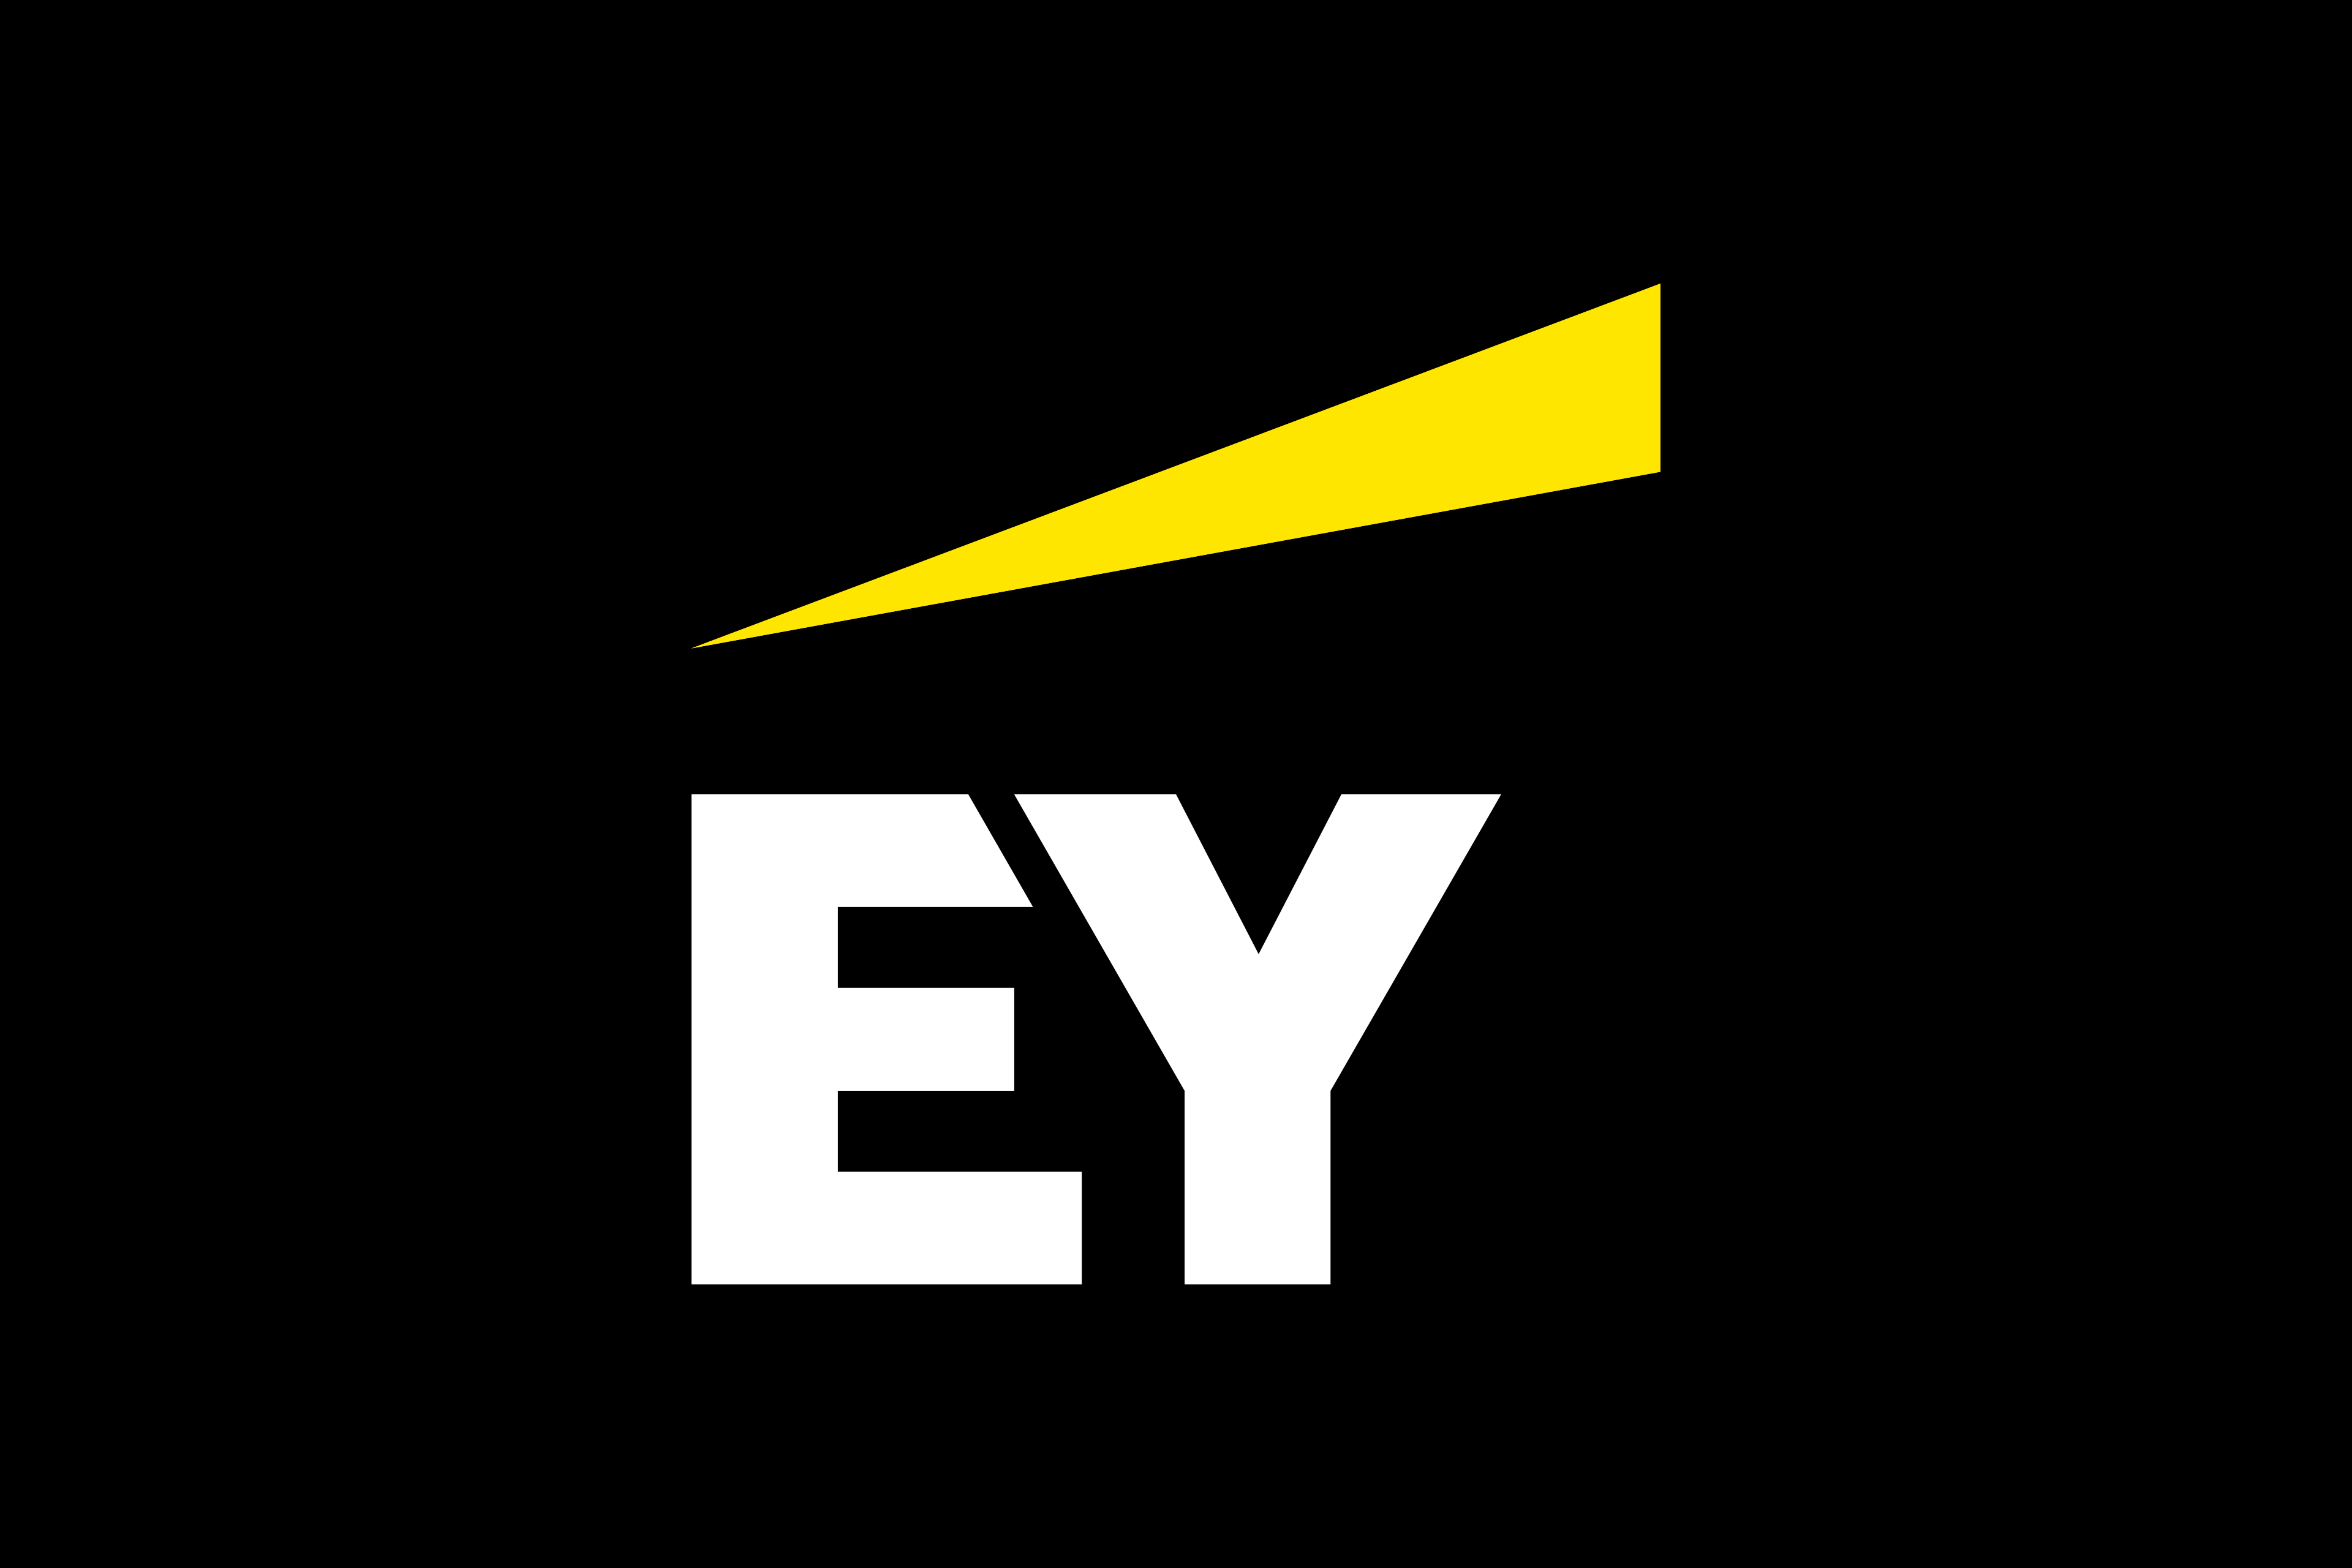 EY CEO Carmine Di Sibio targets $10bn from Silicon Valley tie ups after audit separation